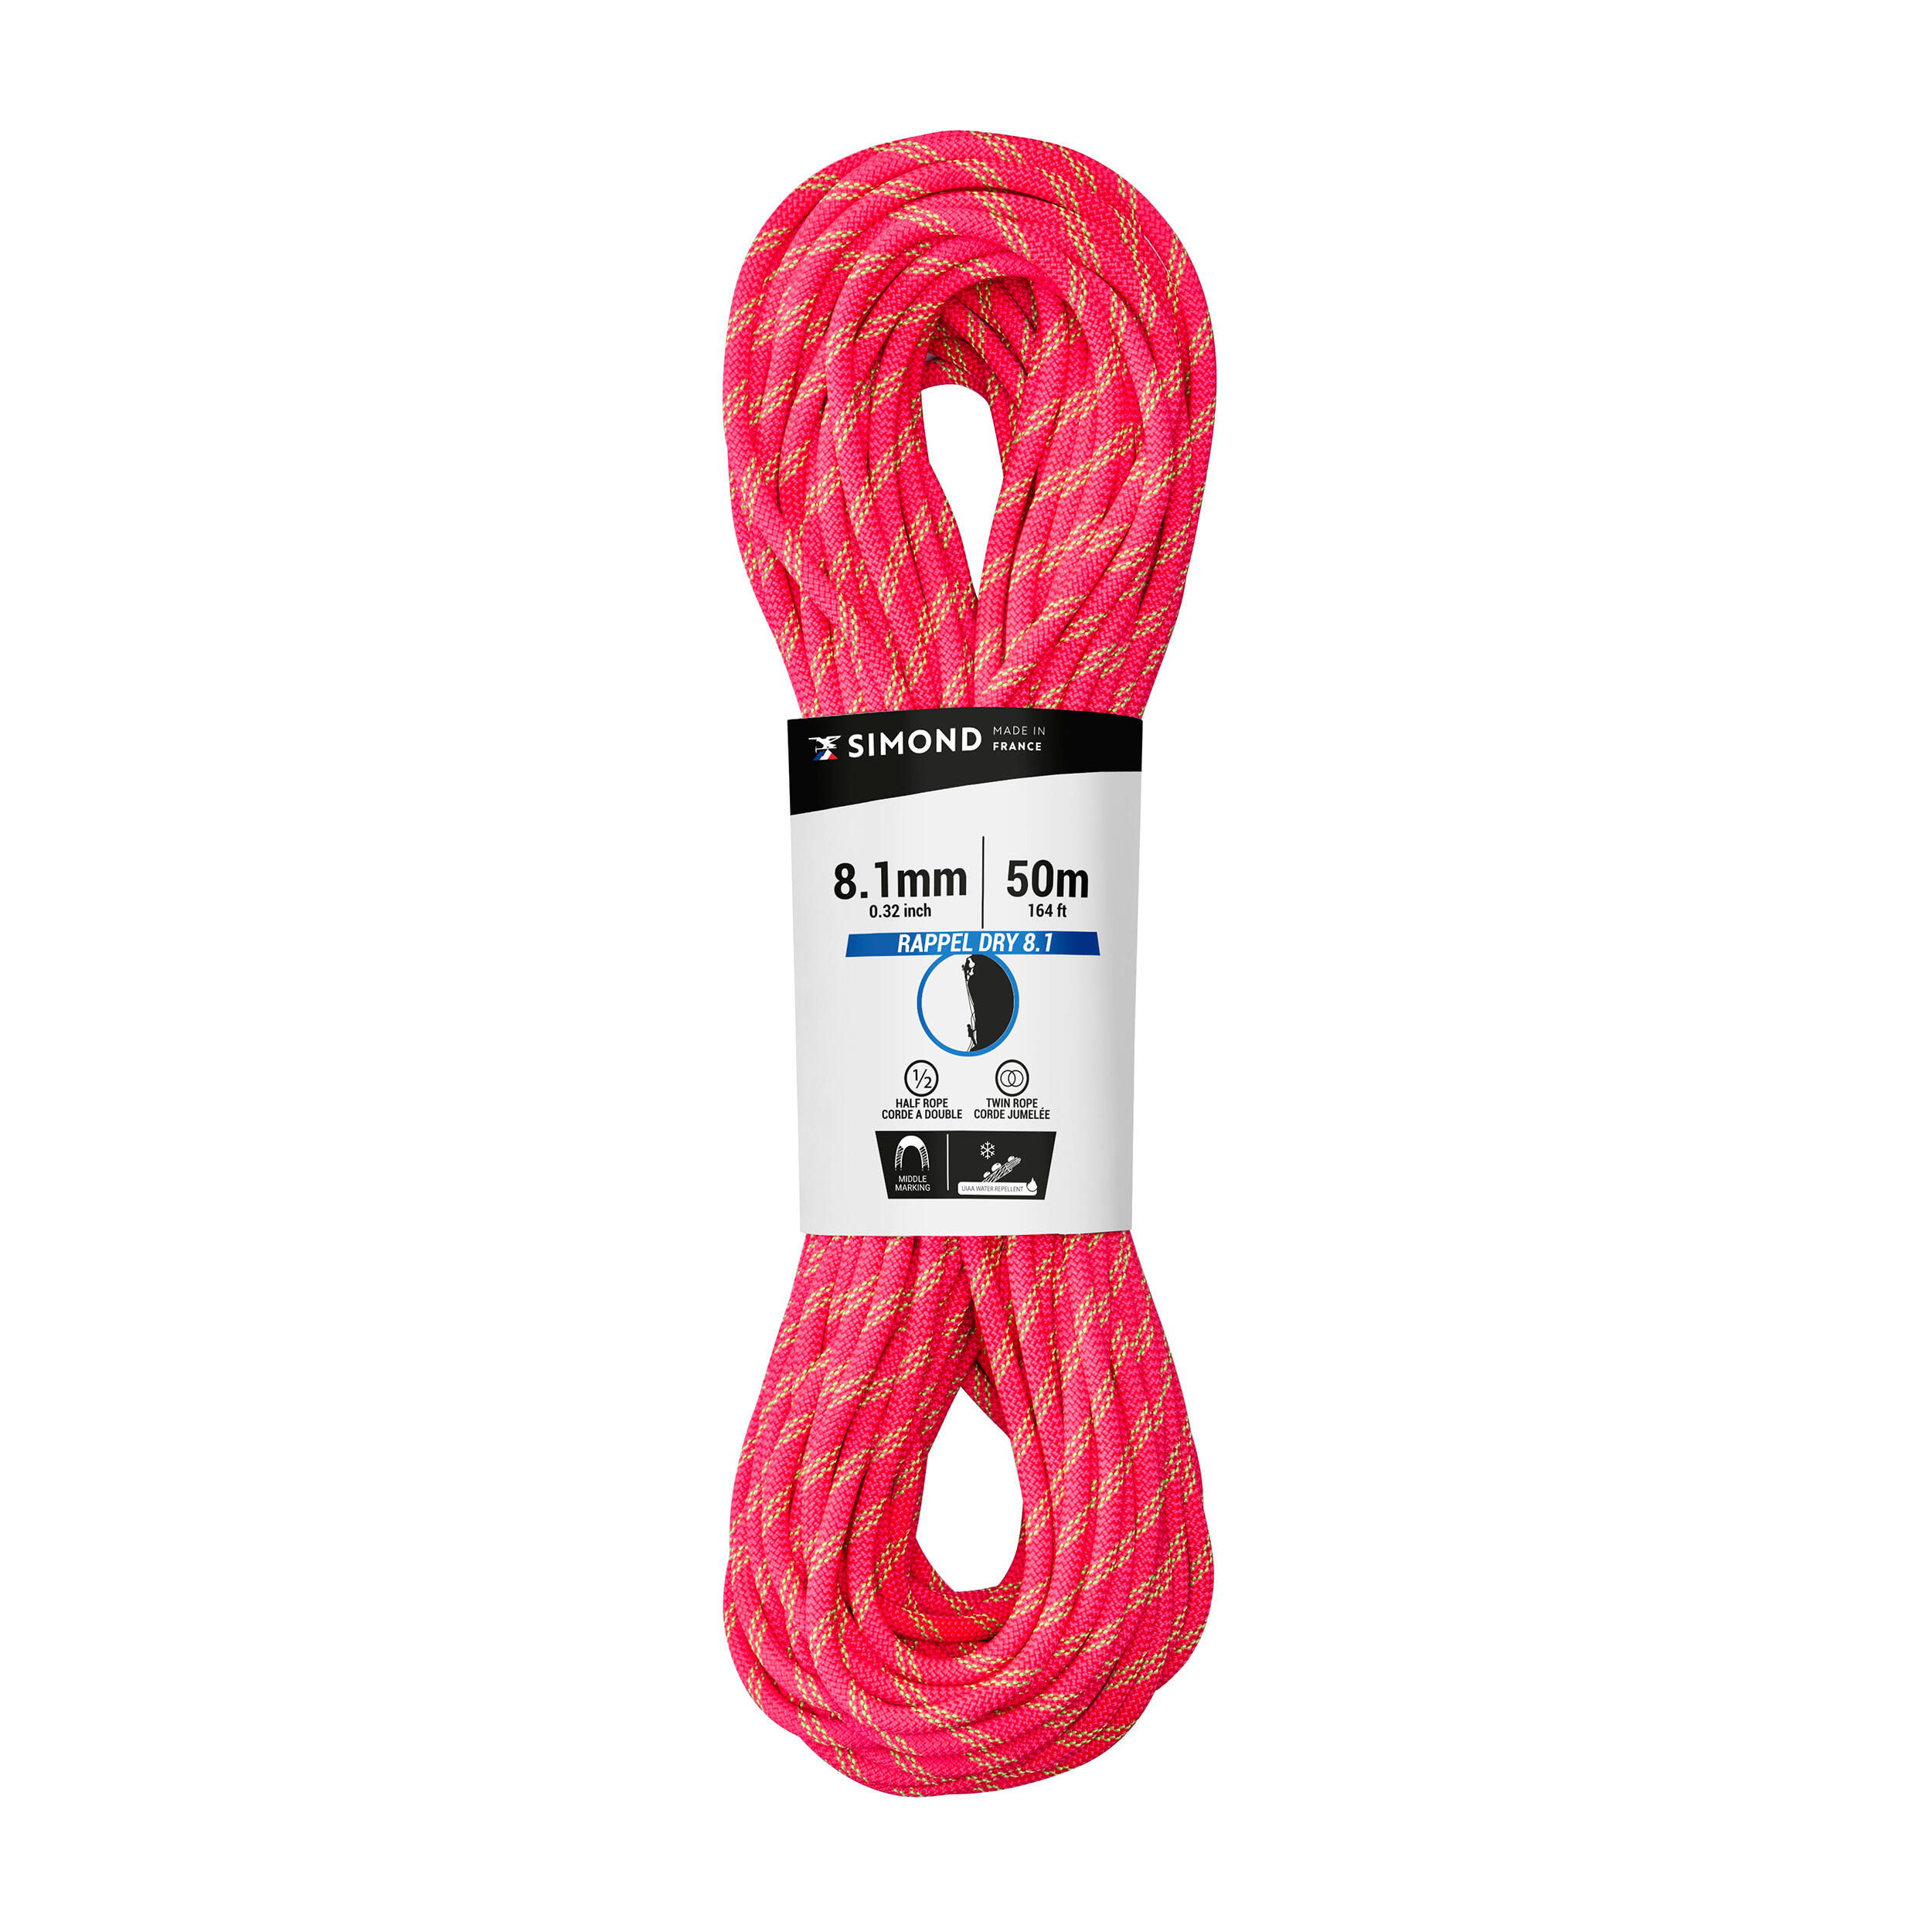 SIMOND Double dry climbing and mountaineering rope 8.1 mm x 50 m - Rappel 8.1 Pink